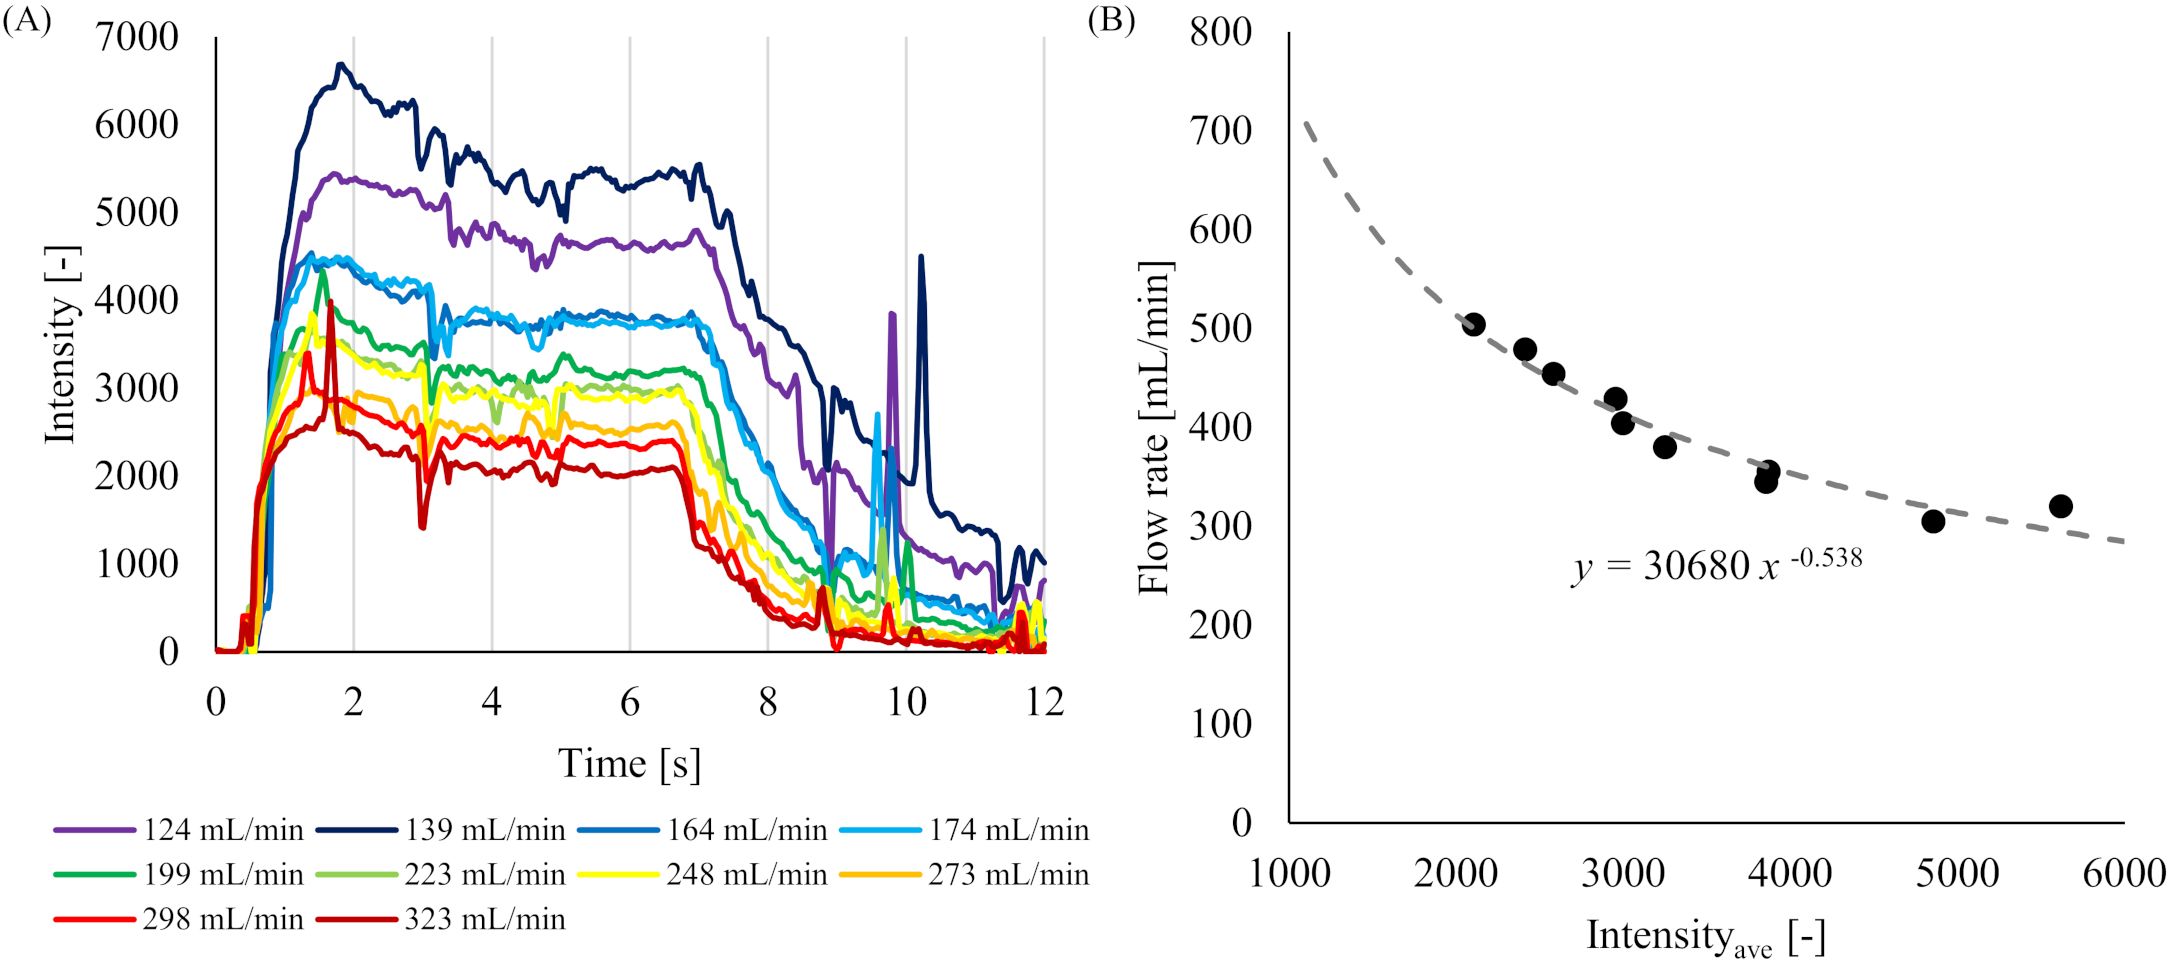 Results of intensity value and flow rate from the 4D-DSA imaging for the ST-model. (A) Time intensity curves (TICs) of the contrast media for 10 flow rates. (B) Relationship between the measured Intensityave and flow rate.